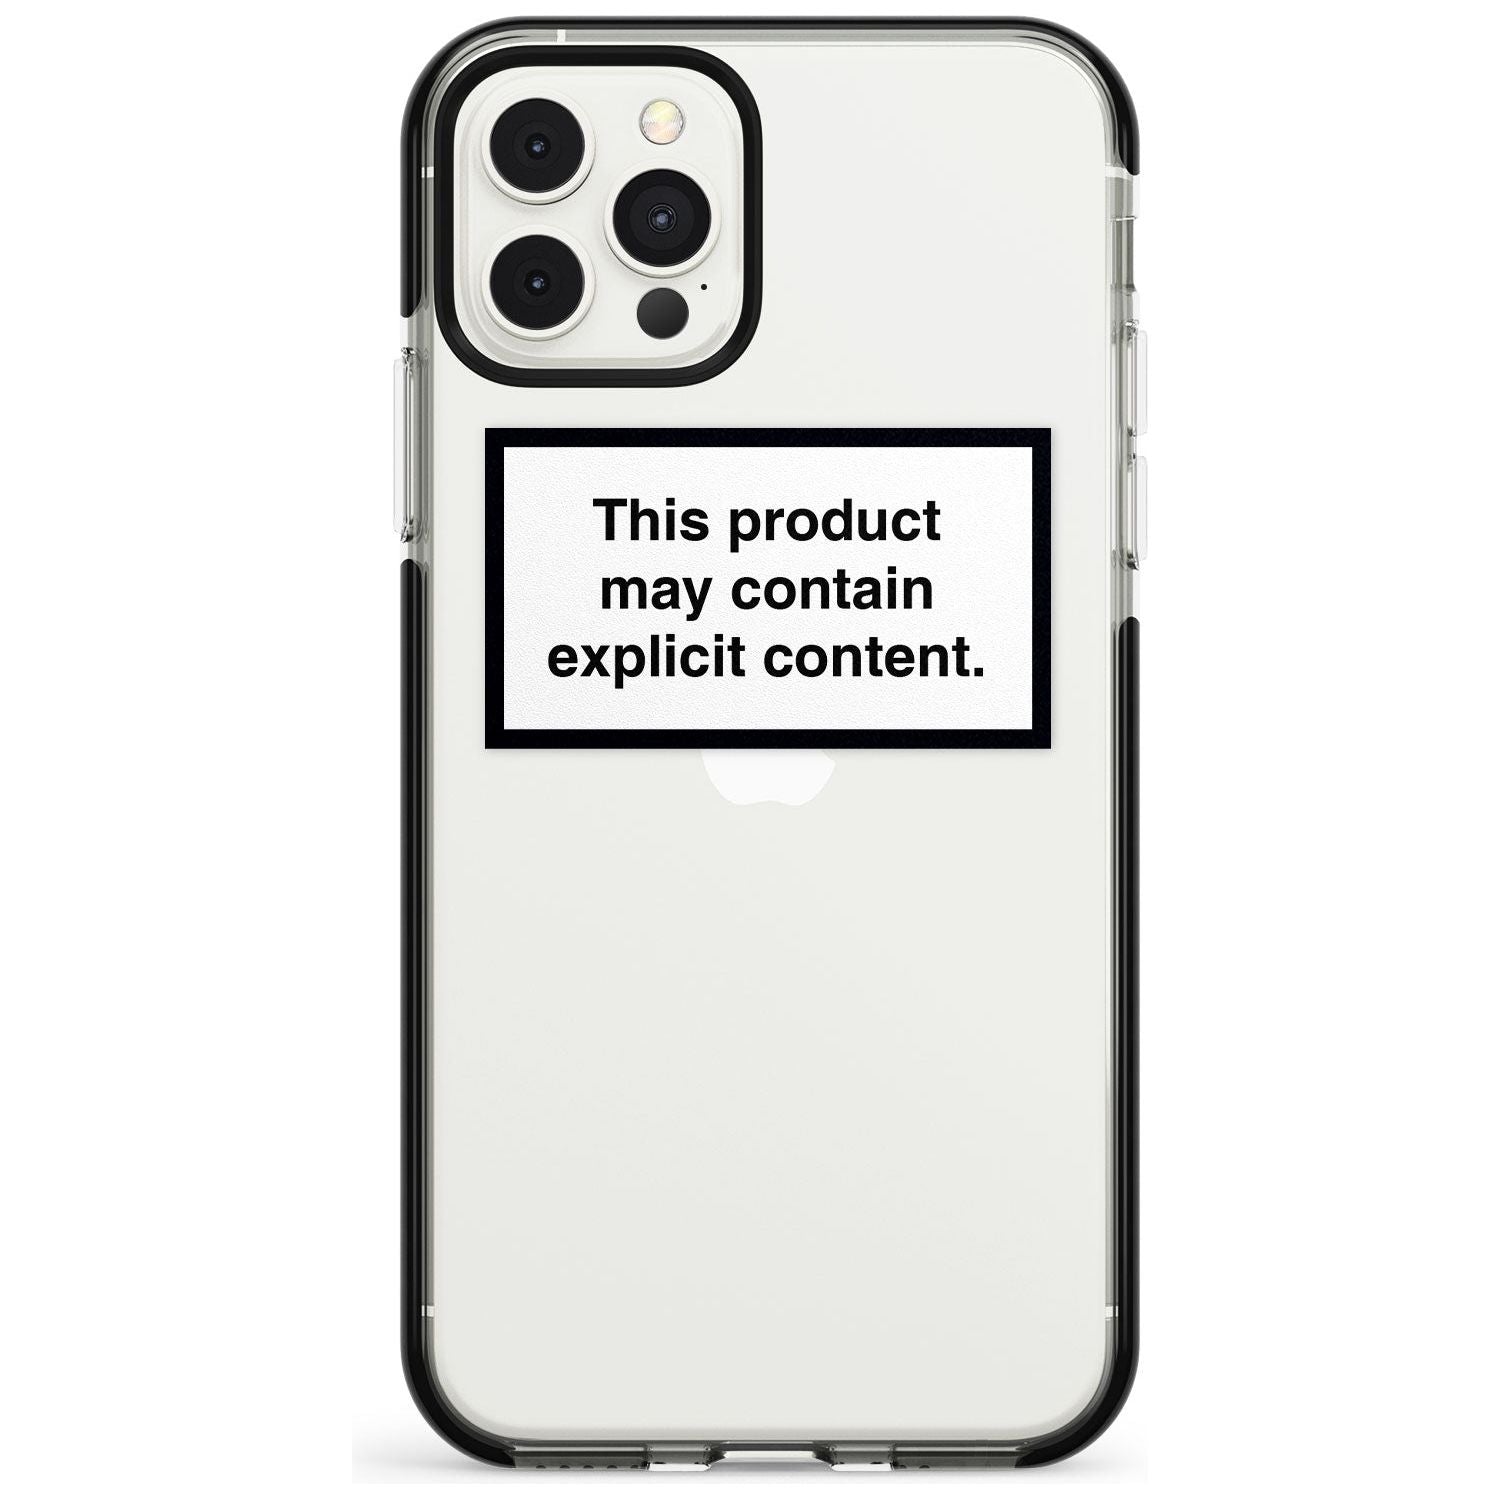 This product may contain explicit content Pink Fade Impact Phone Case for iPhone 11